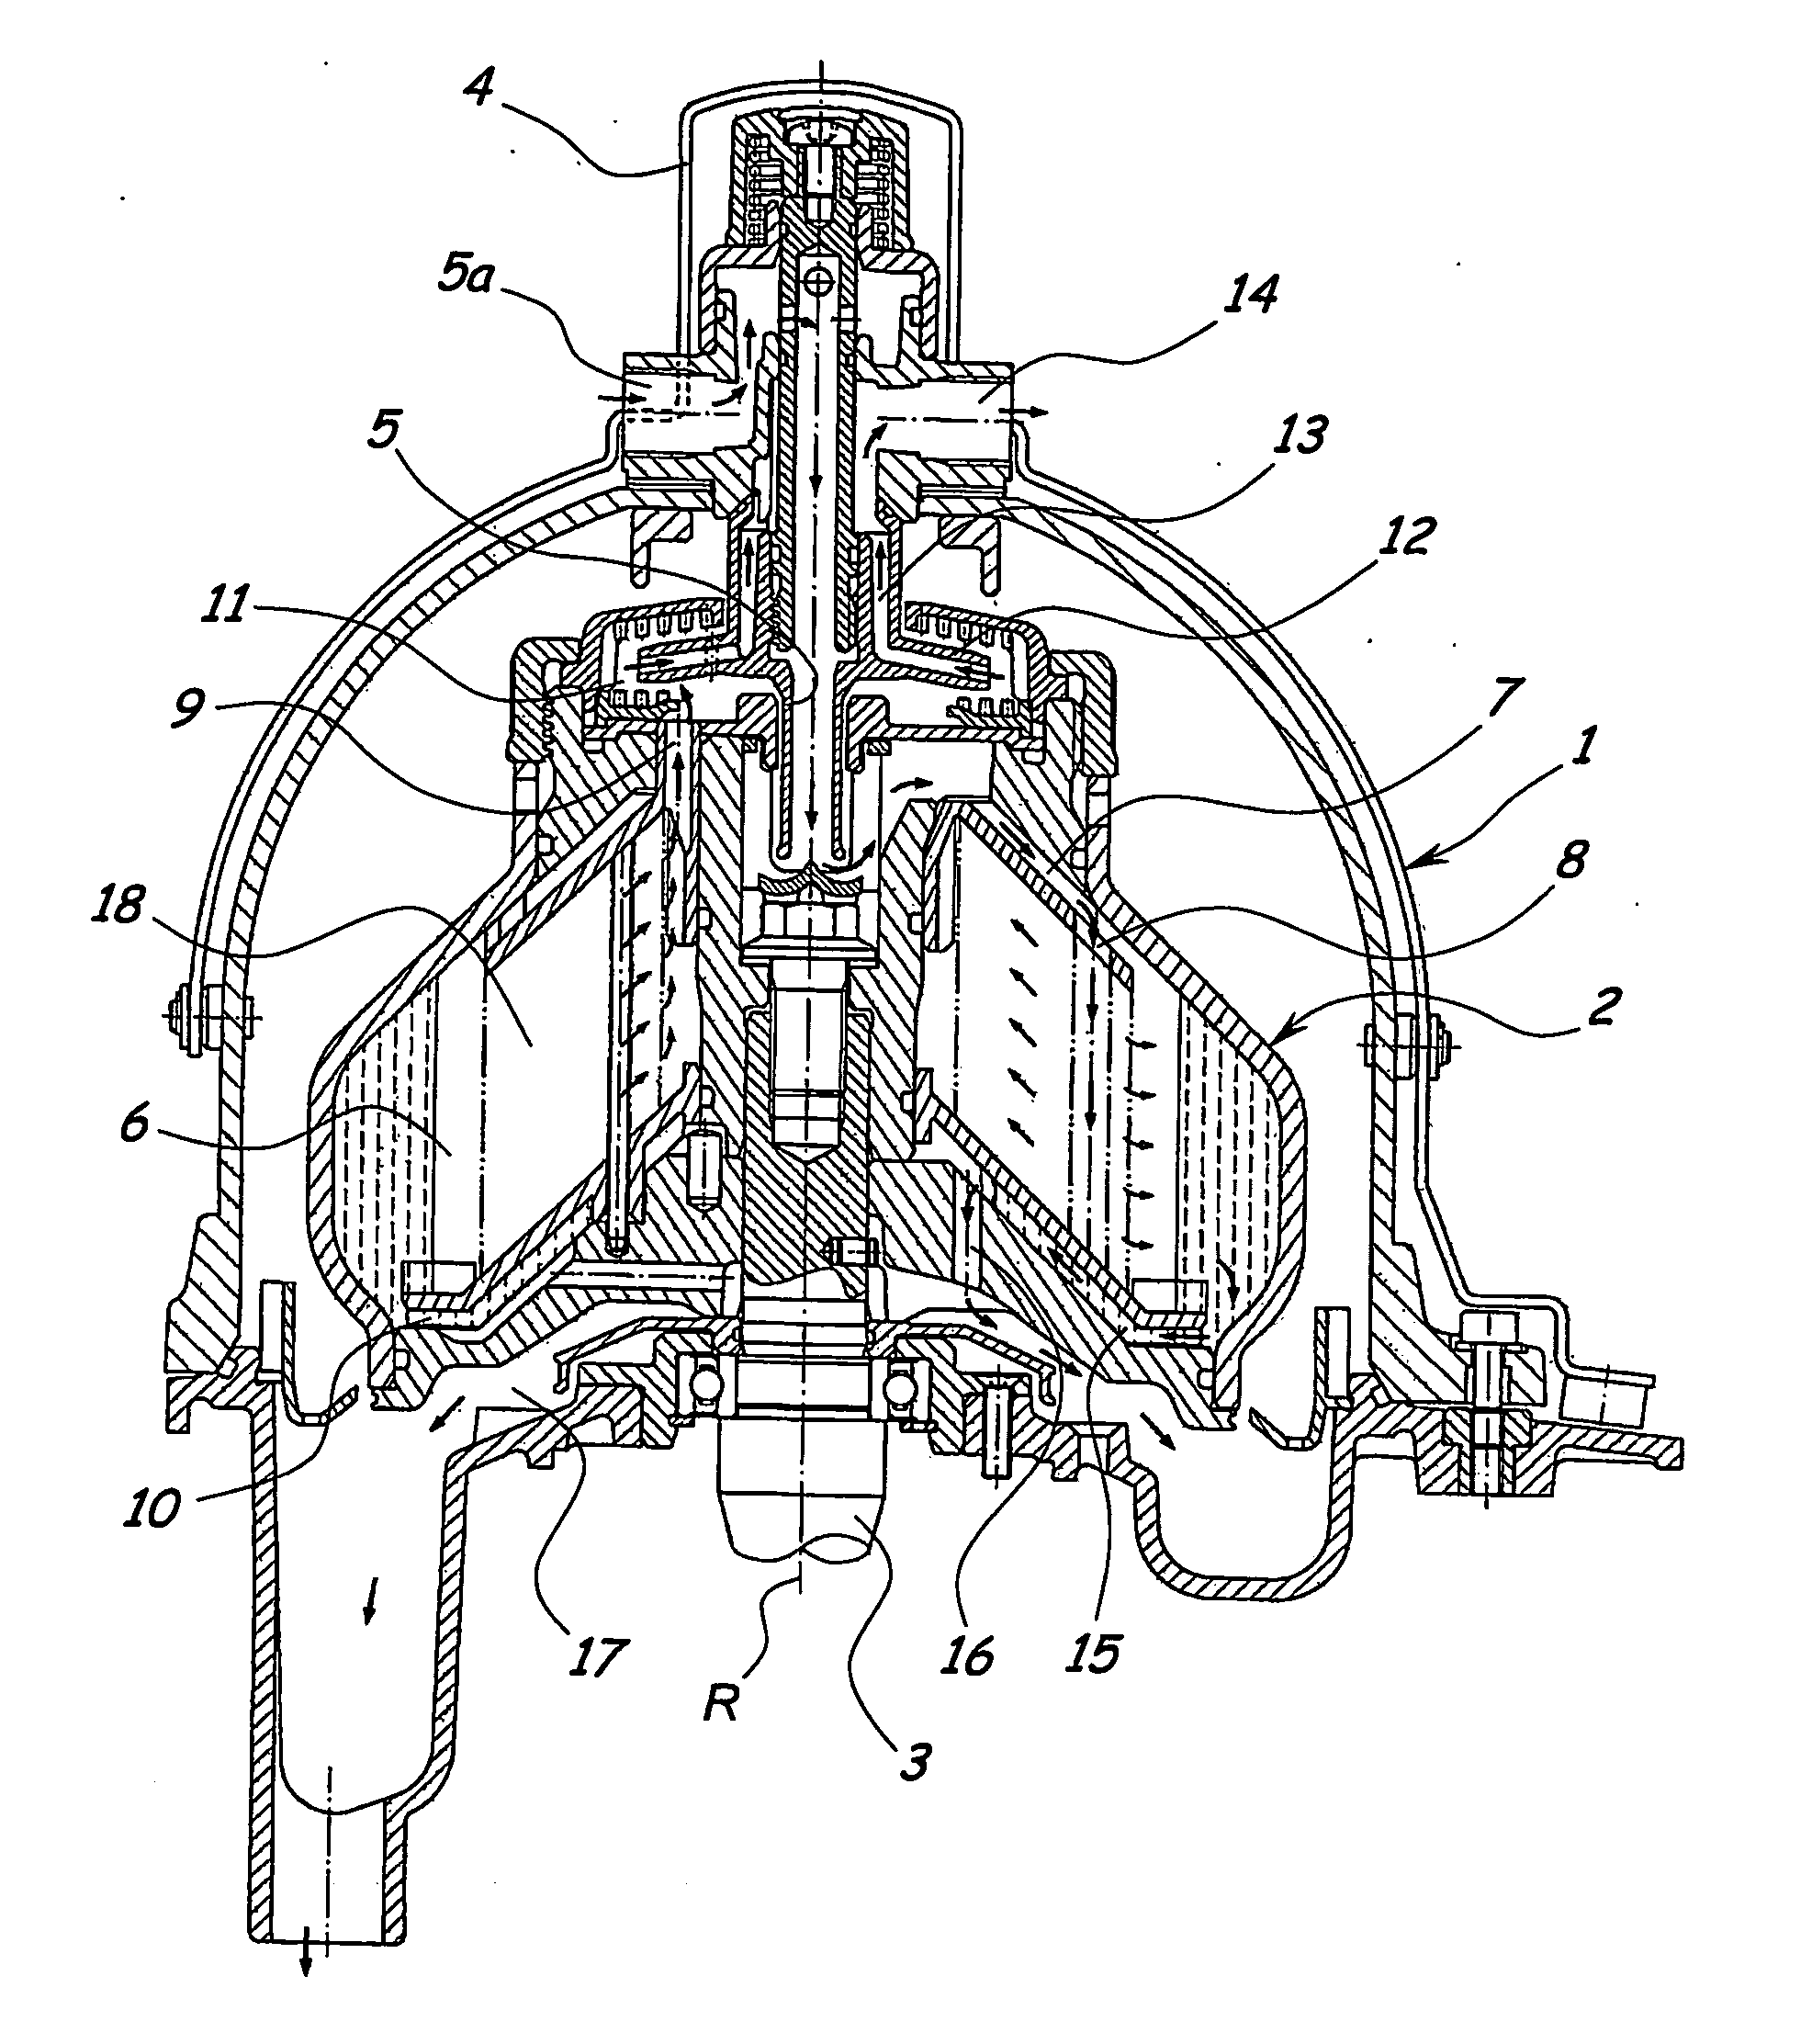 Method of purifying contaminated oil from particles suspended in the oil in a centrifugal separator